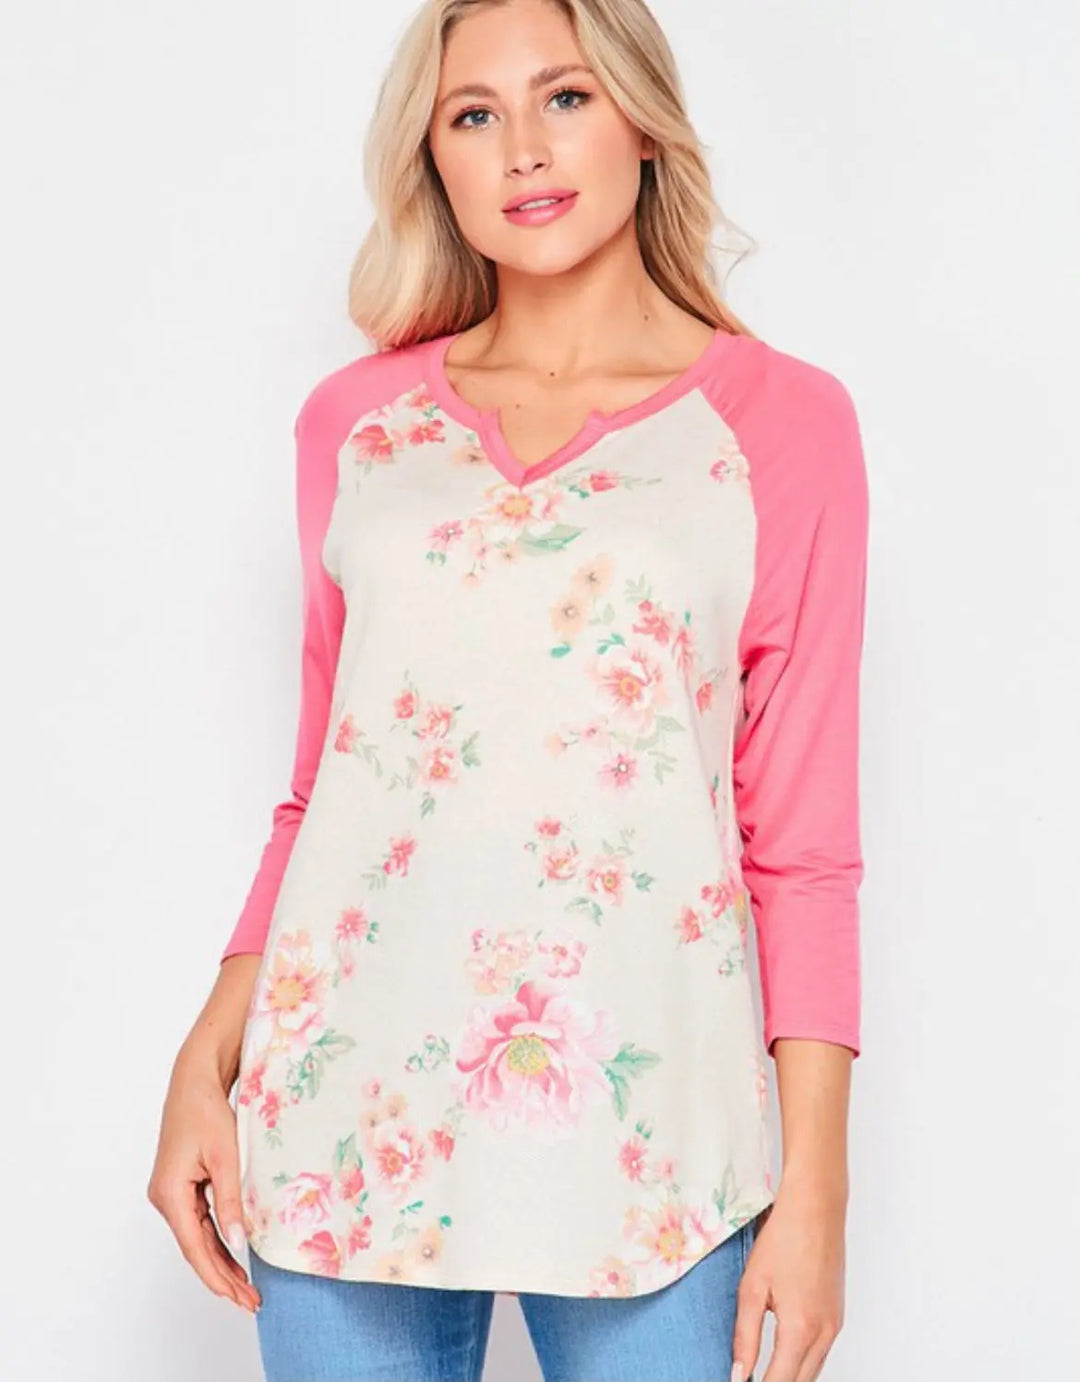 DOOR BUSTER Pink Floral Raglan Top-long sleeve top-HoneyMe-Styled by Steph-Women's Fashion Clothing Boutique, Indiana